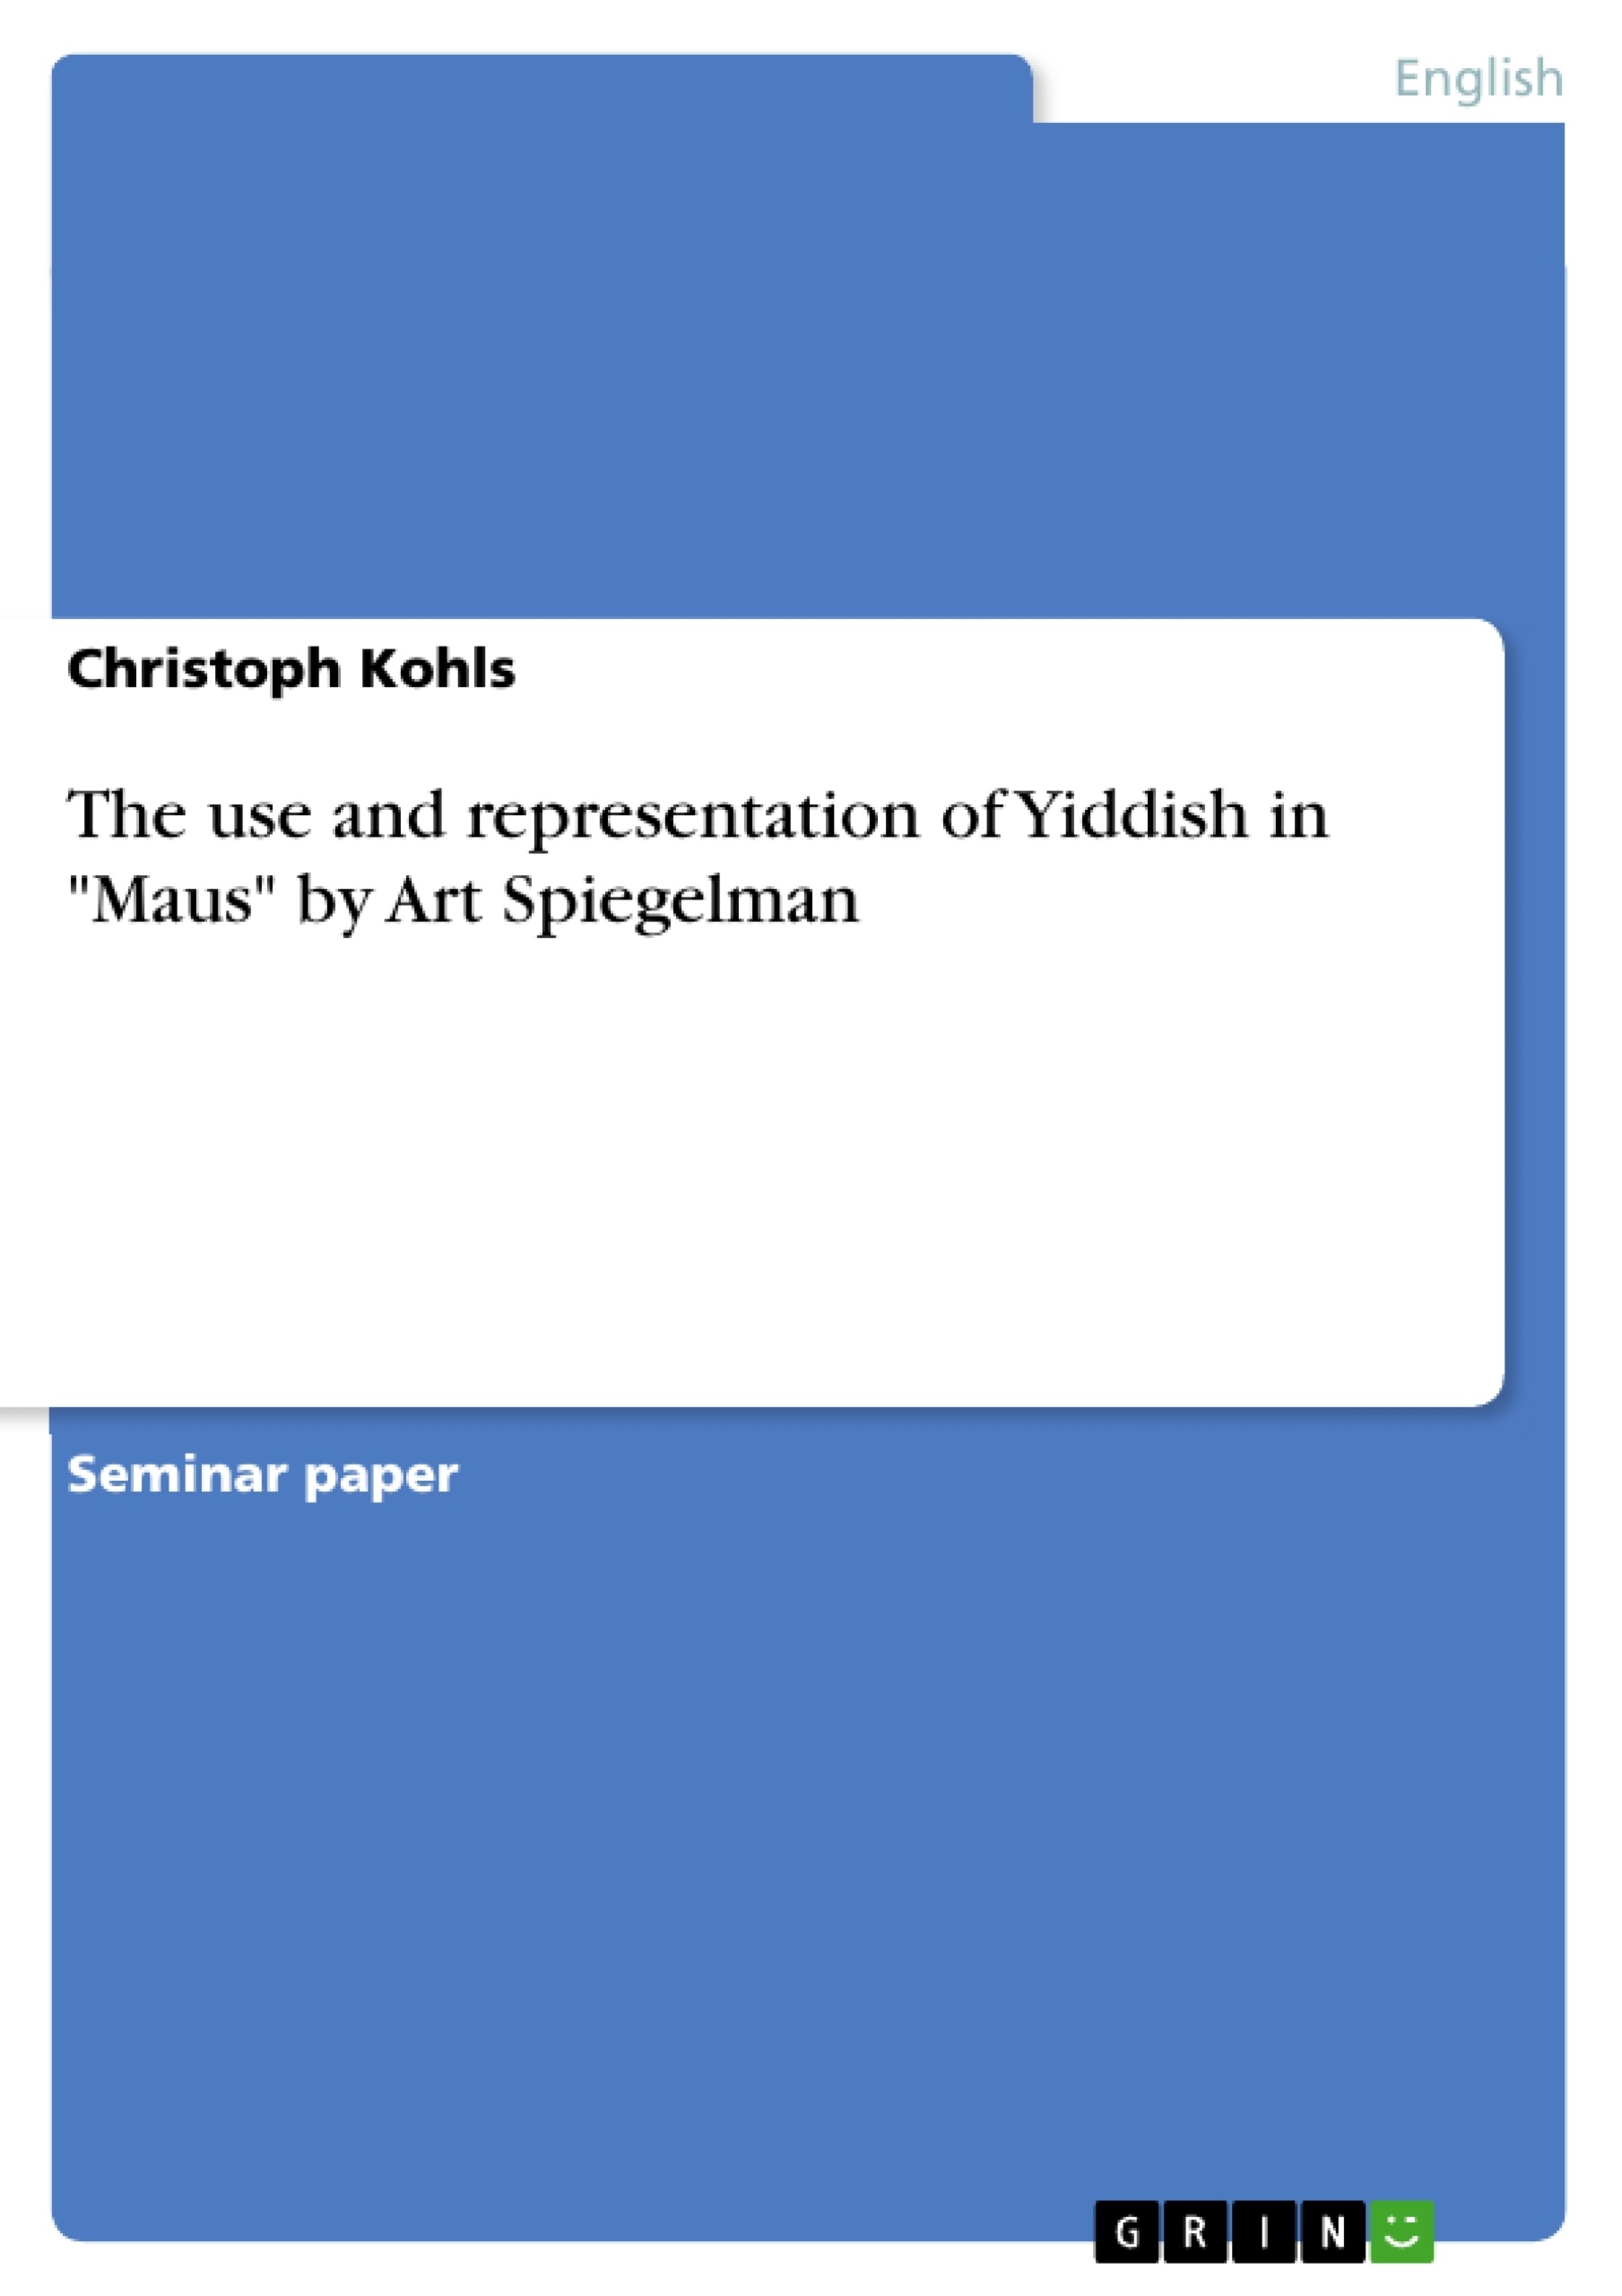 Title: The use and representation of Yiddish in "Maus" by Art Spiegelman